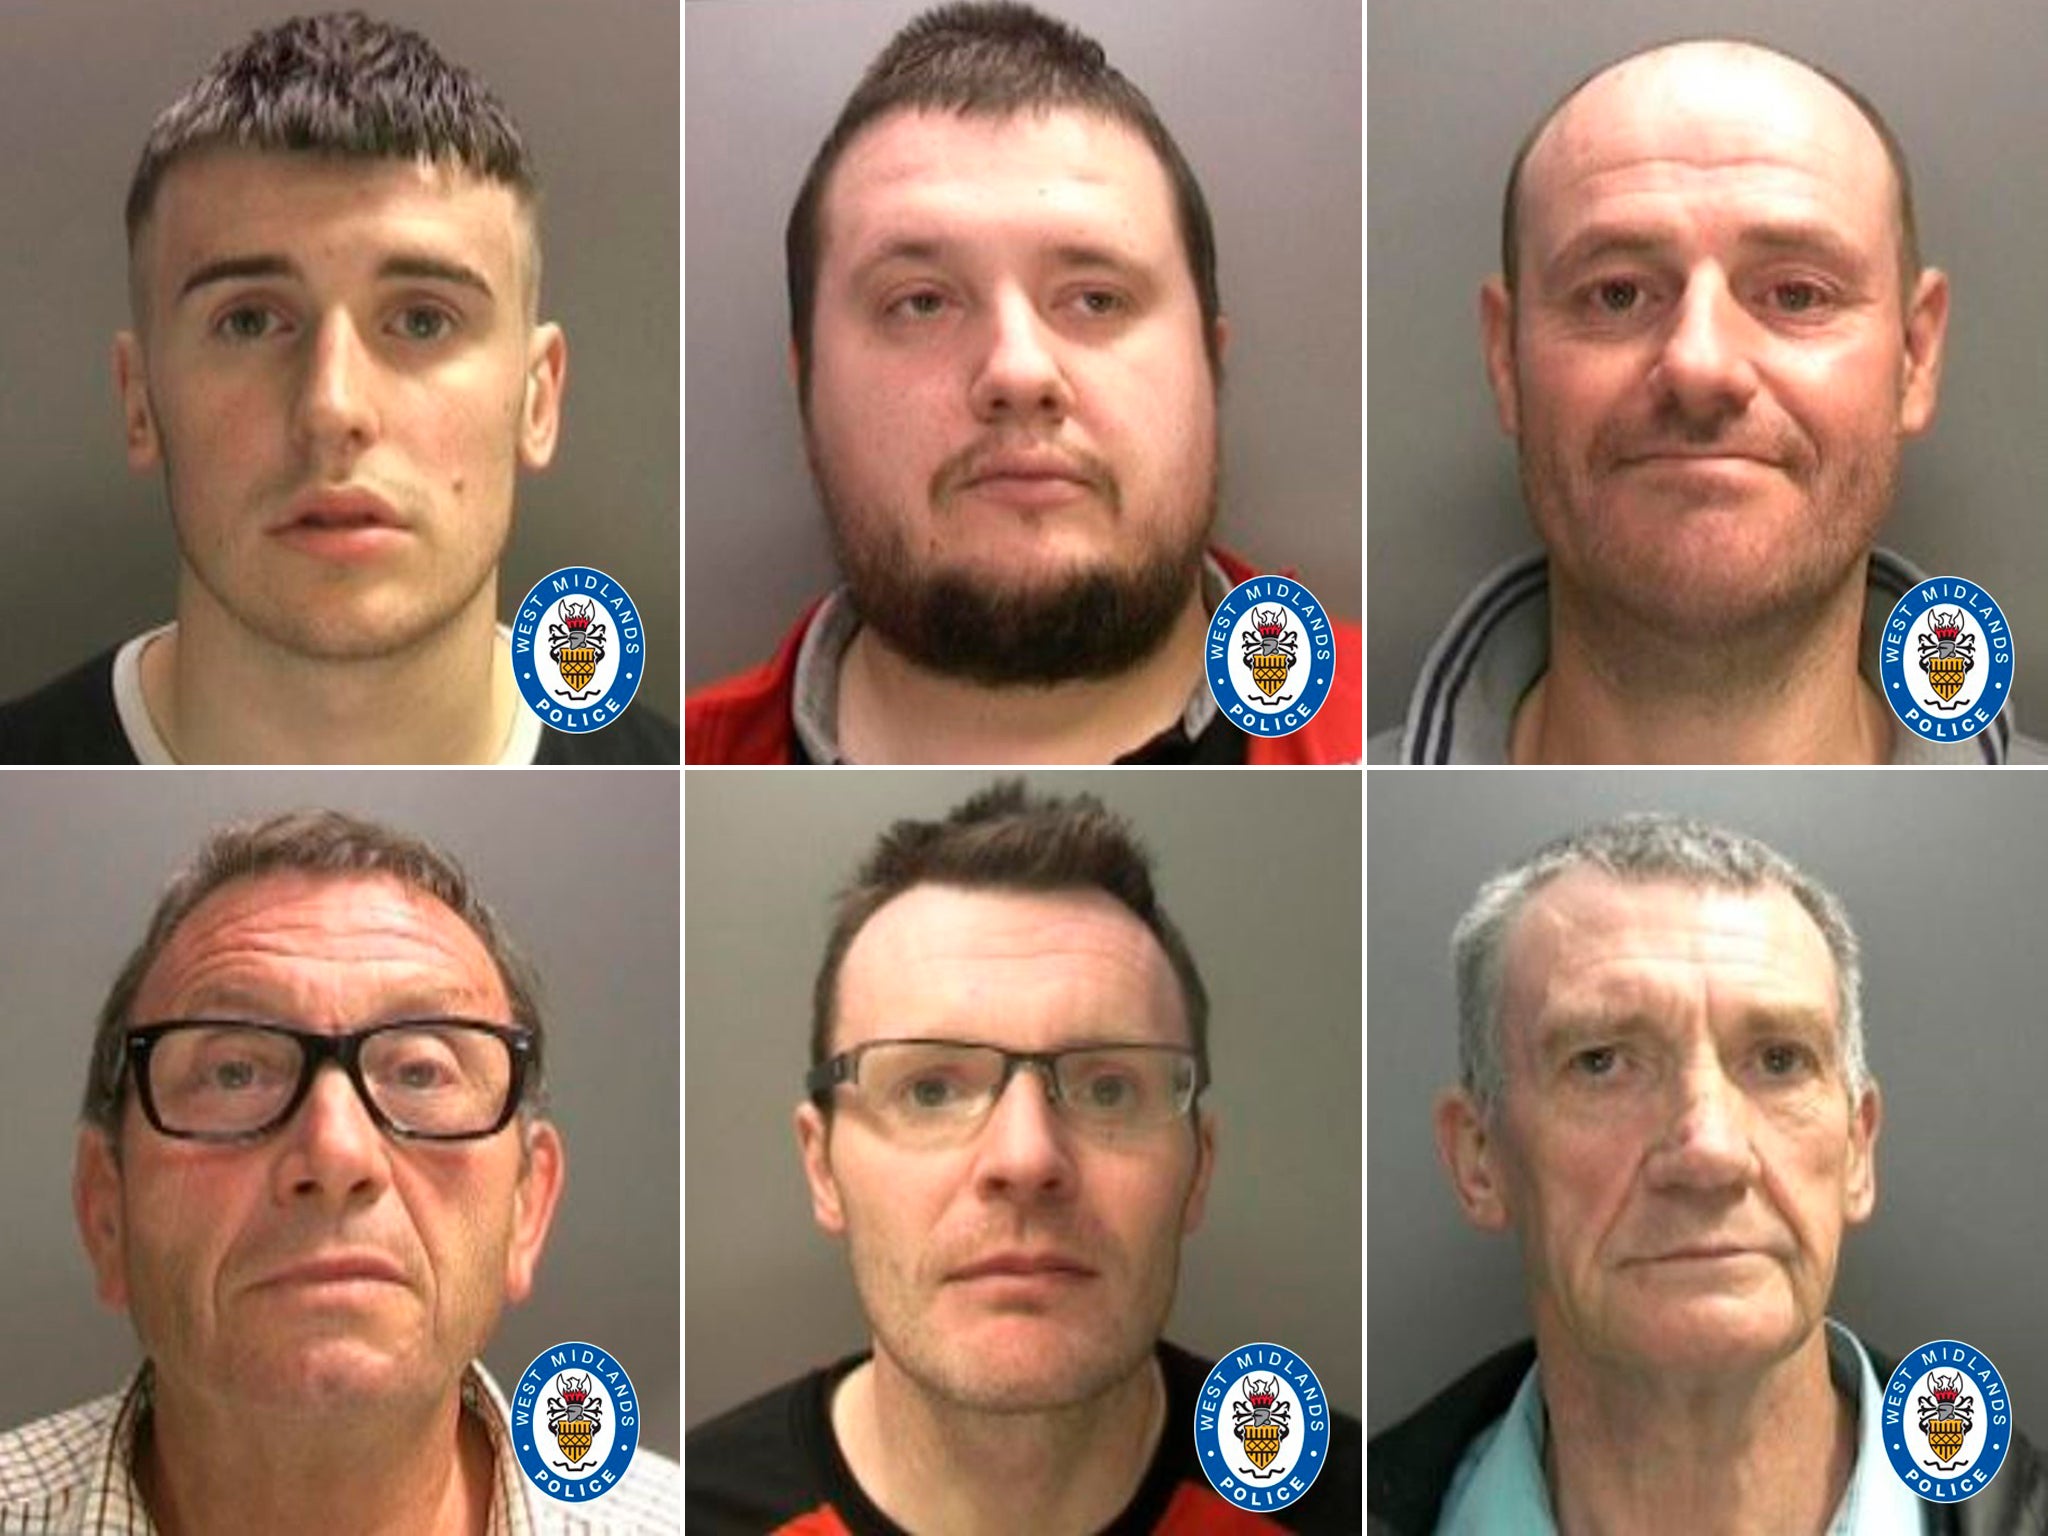 Eight women among 21 members of 'abhorrent and cruel' child abuse ring |  The Independent